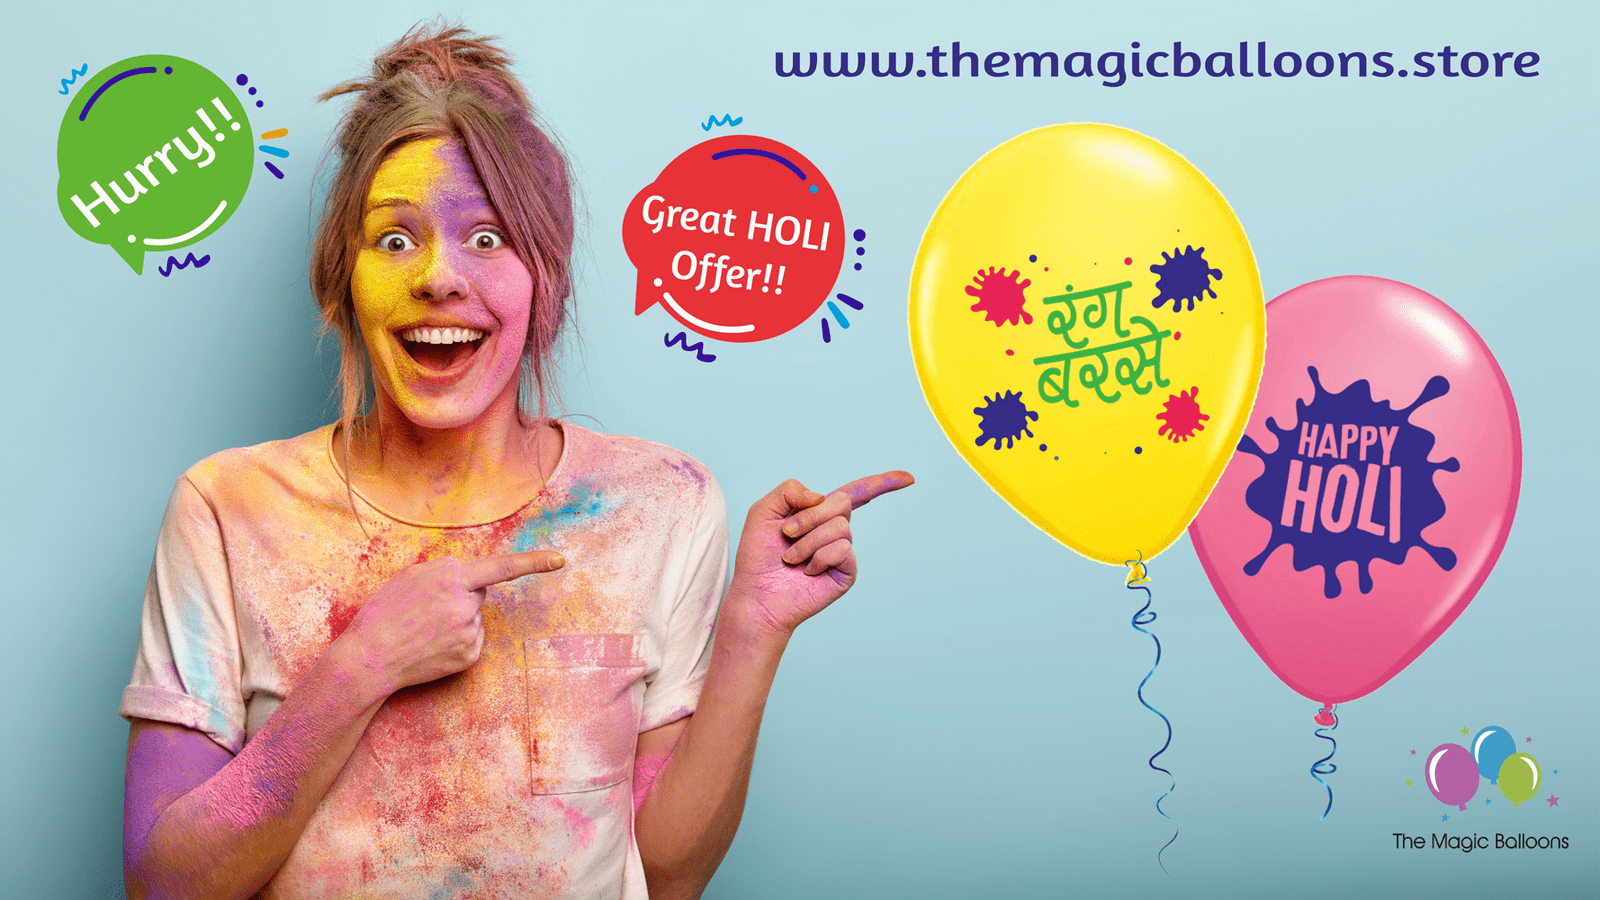 Holi Color Splashes with Fun Party & Balloon Decor - The Magic Balloon Store Suggests How